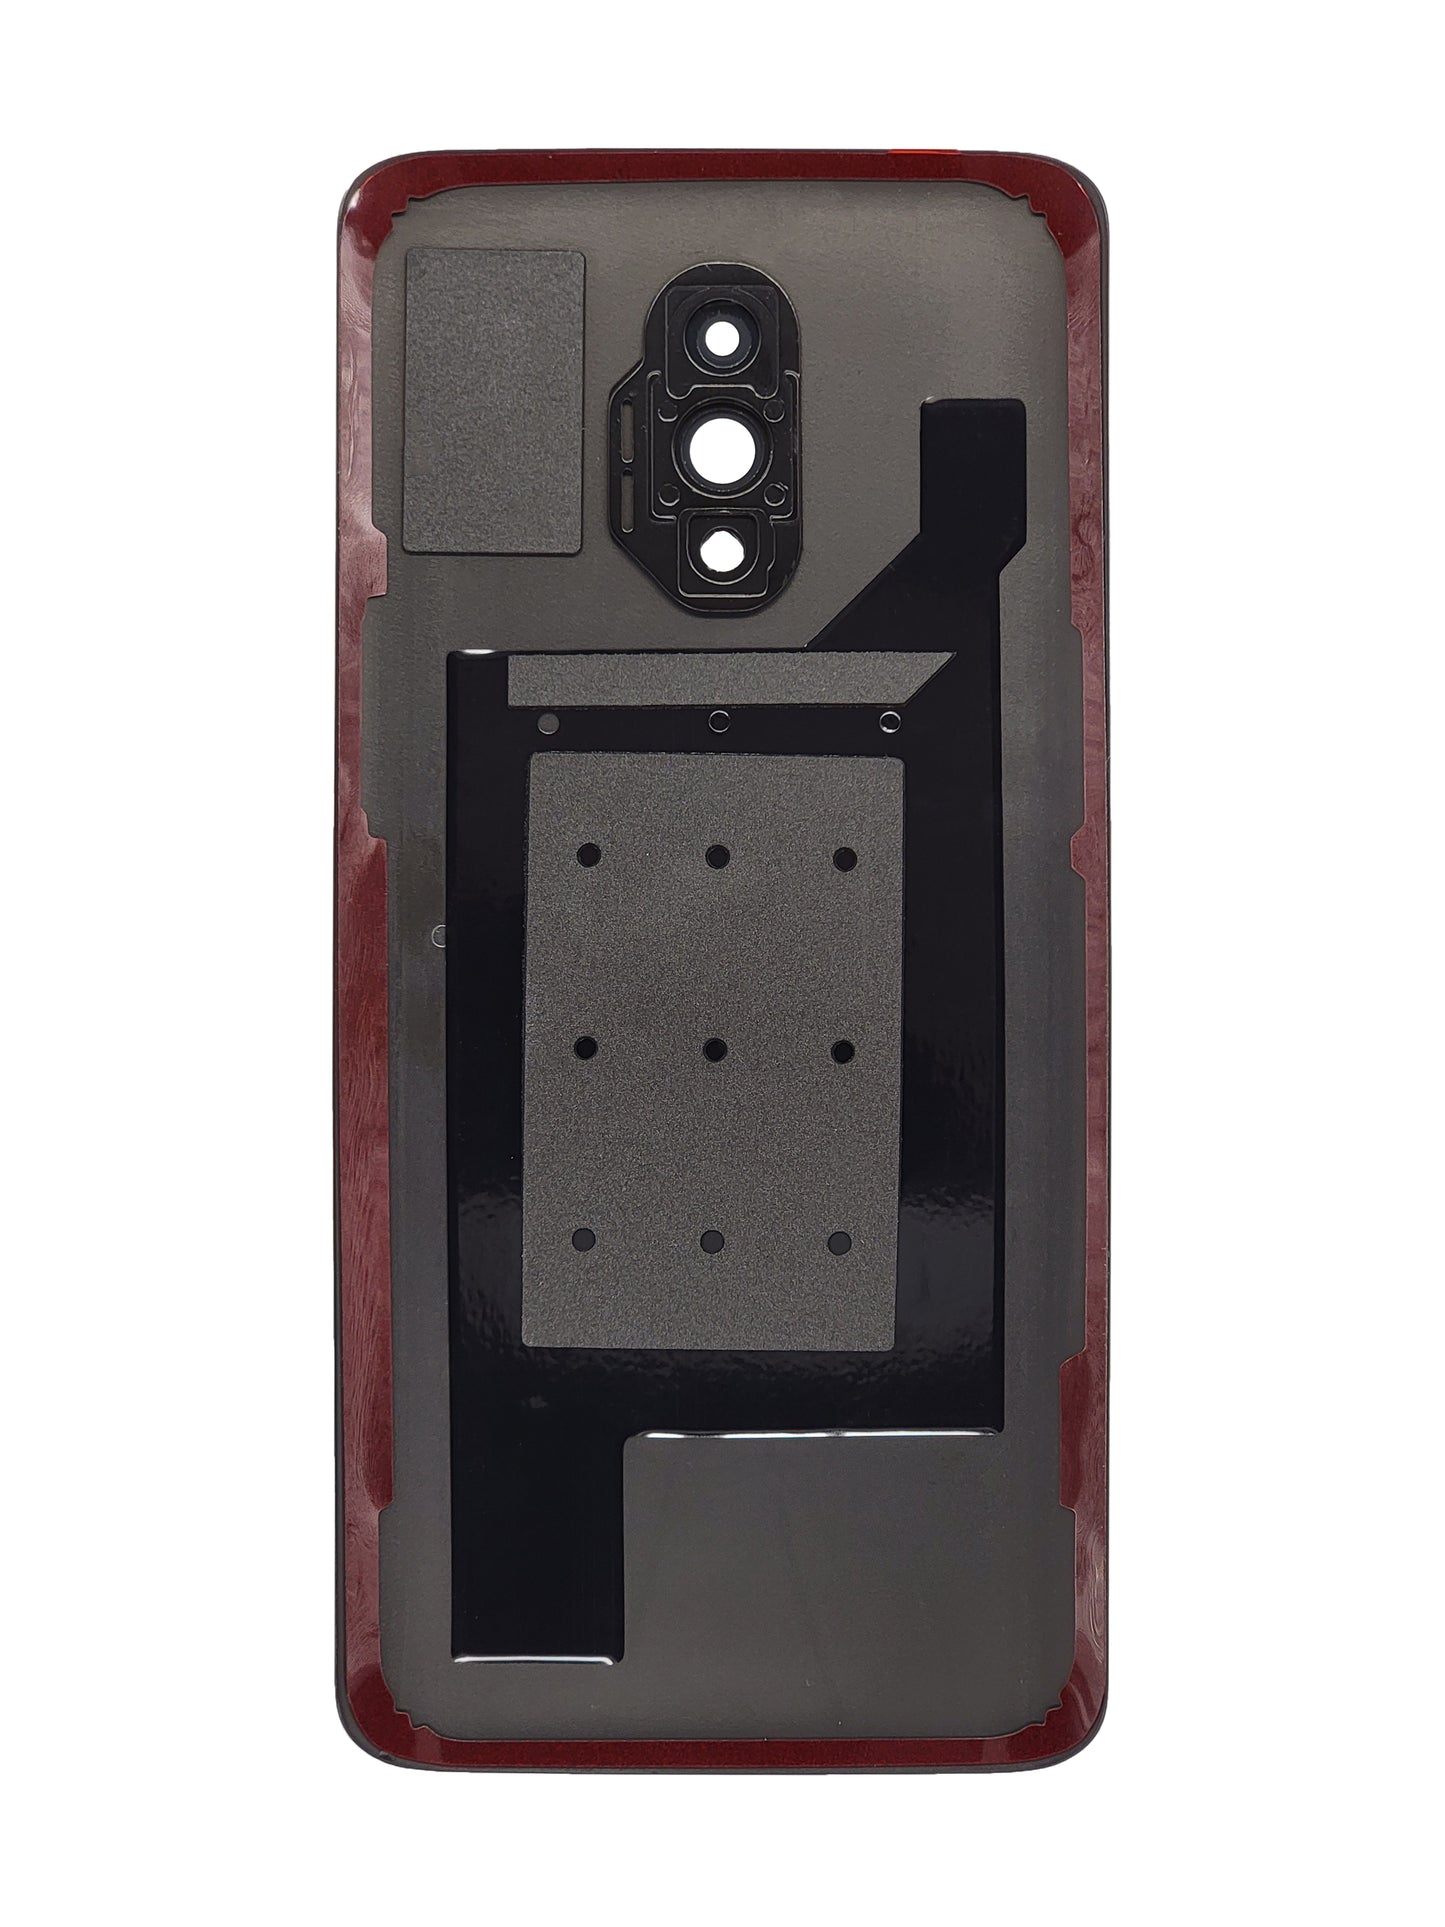 OPS 1+7 Back Cover (Gray)